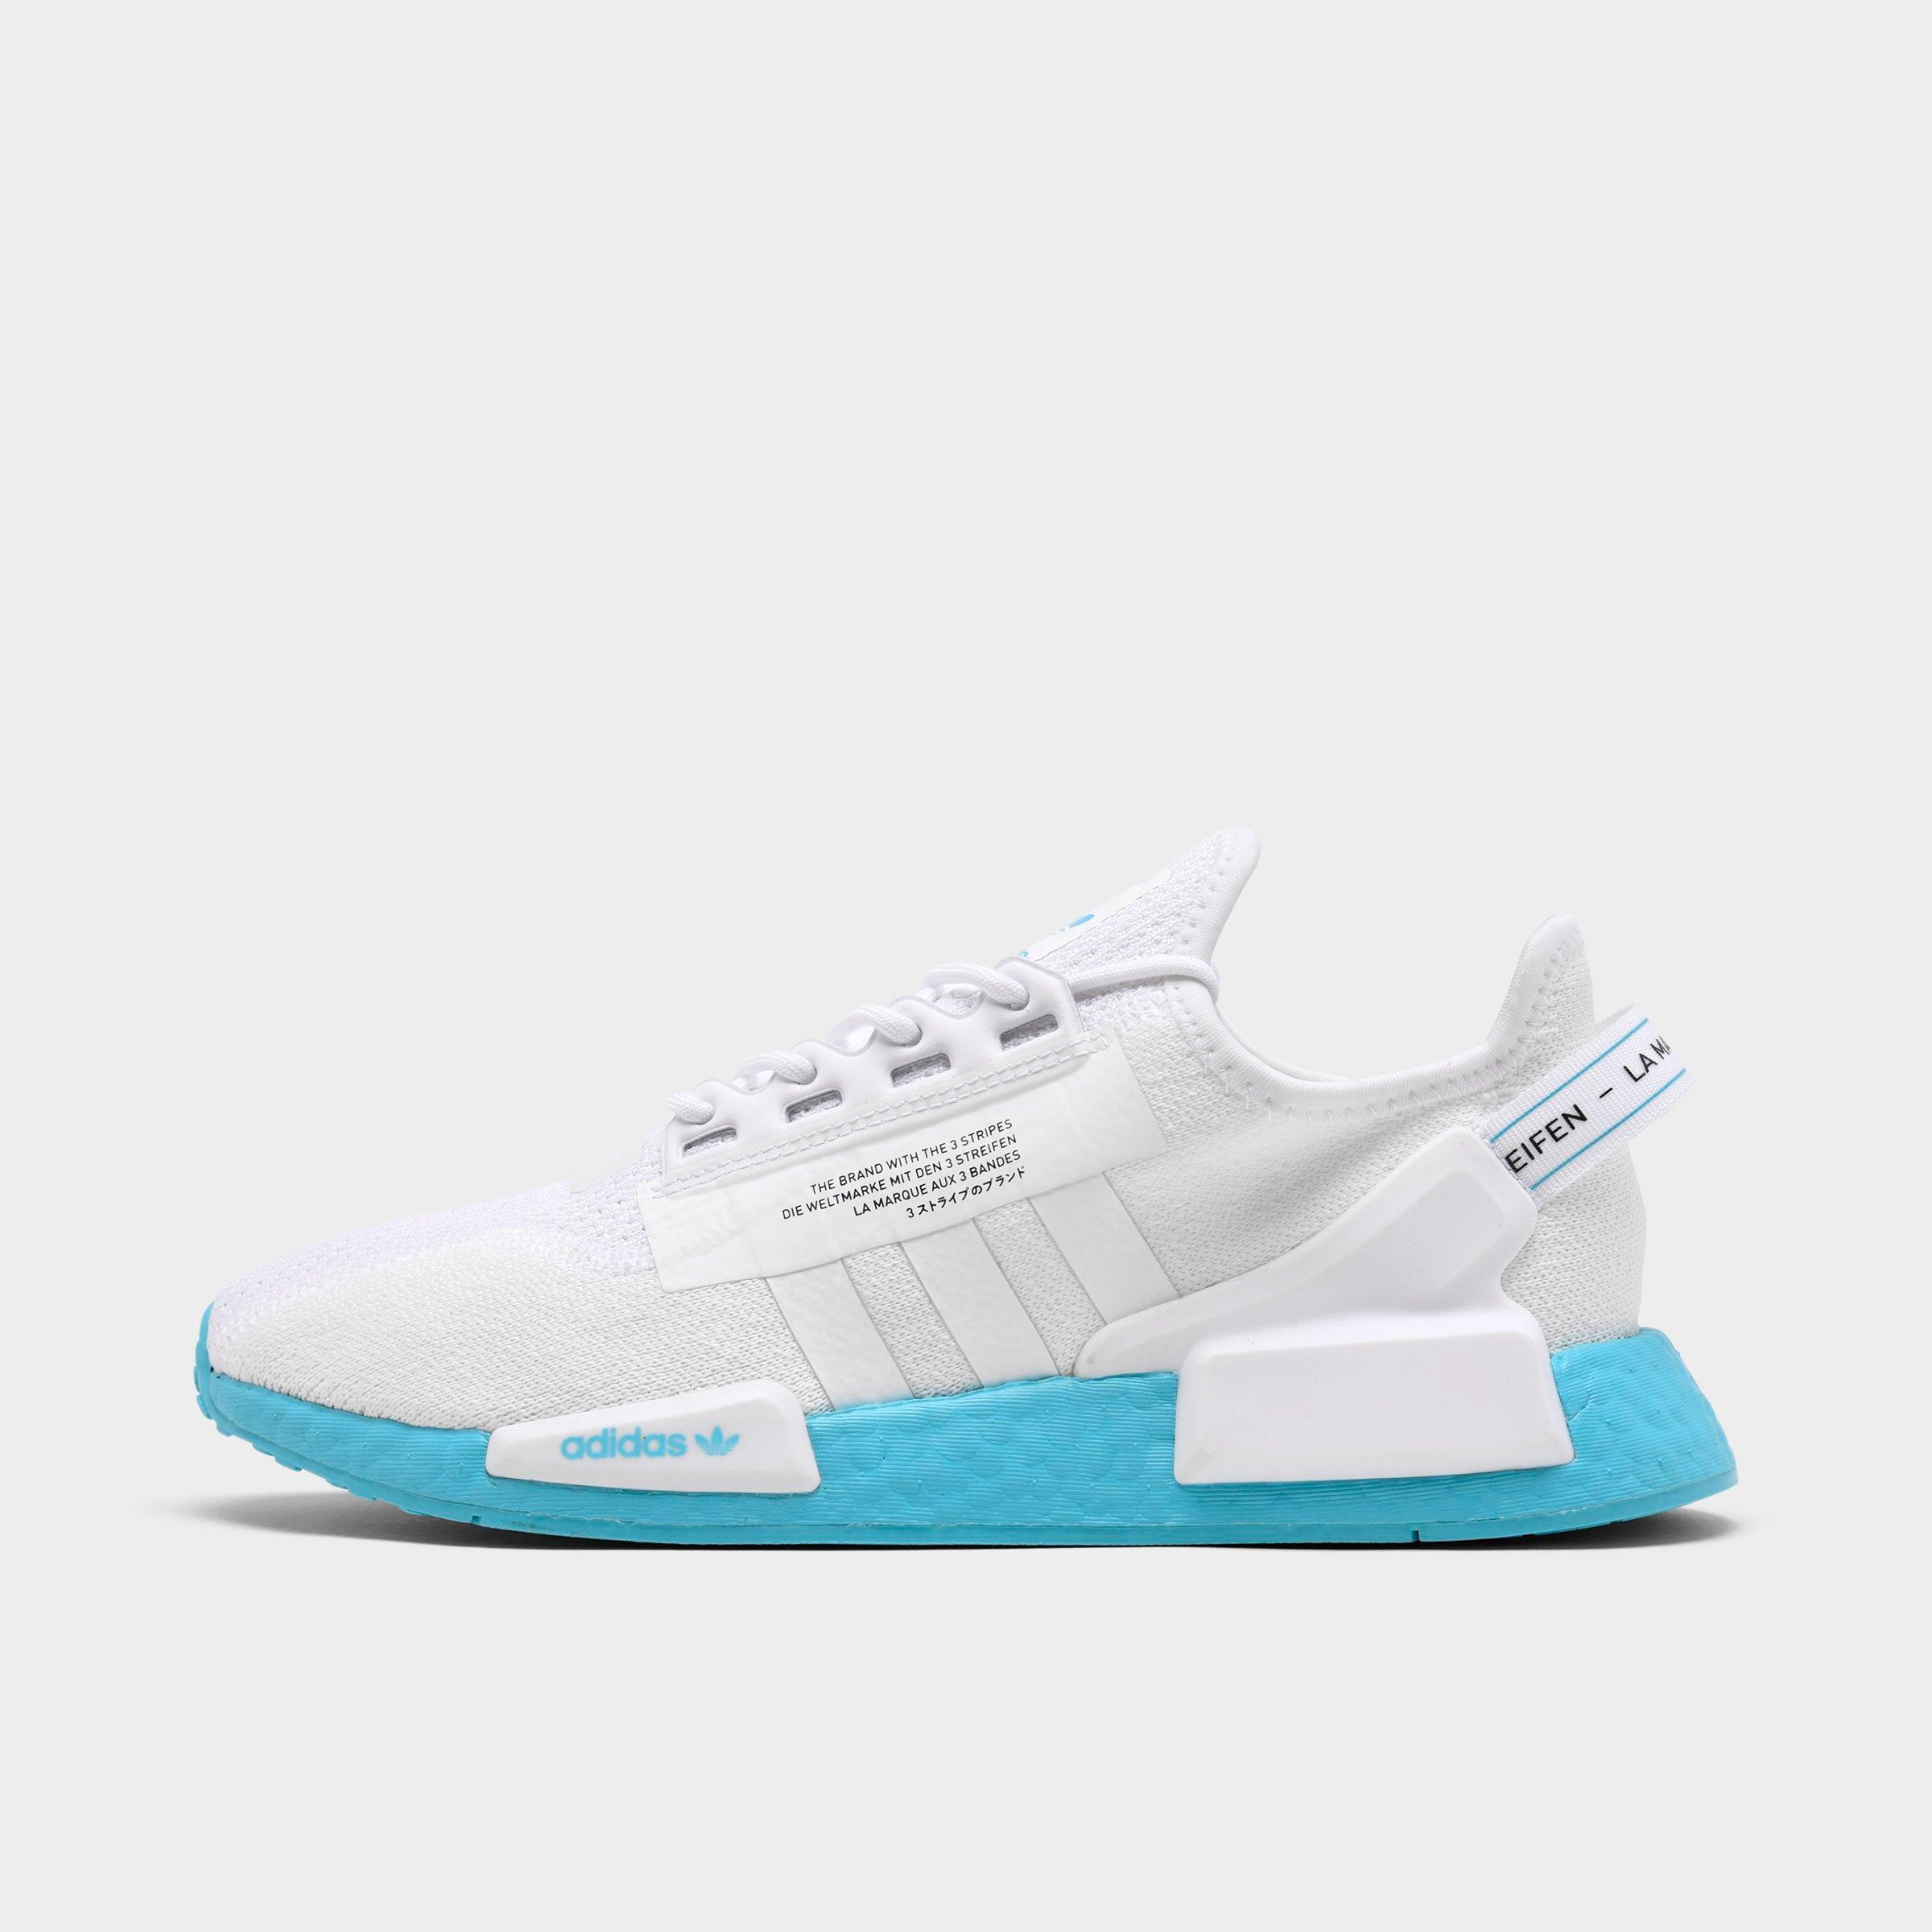 Adidas NMD R1 V2 Casual Shoes by Finish Line